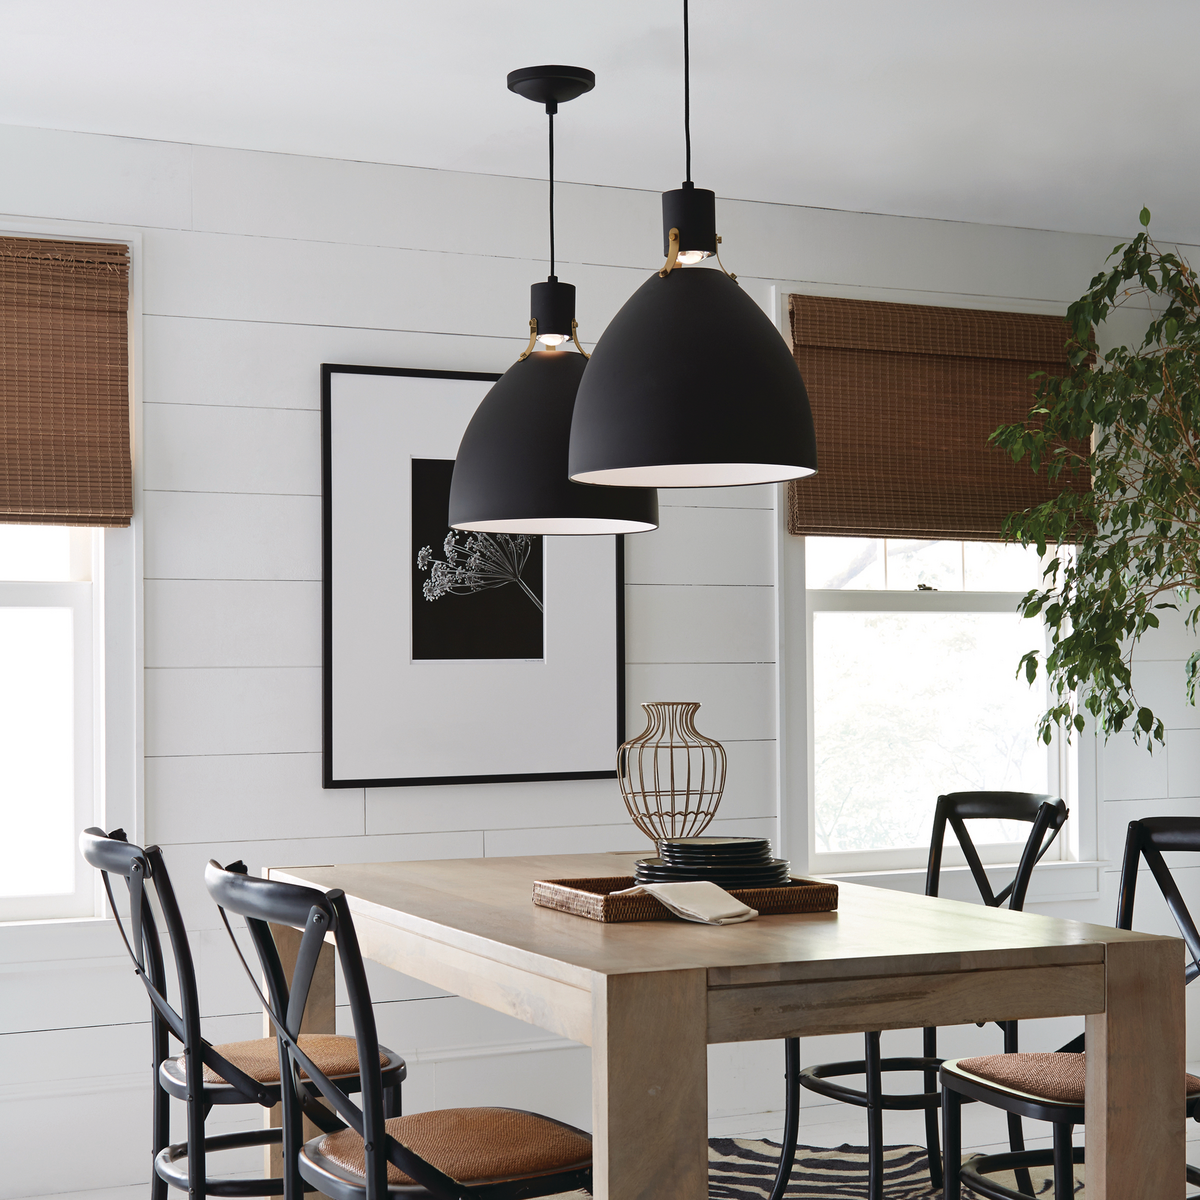 A pair of large hanging lamps over a dining room table.